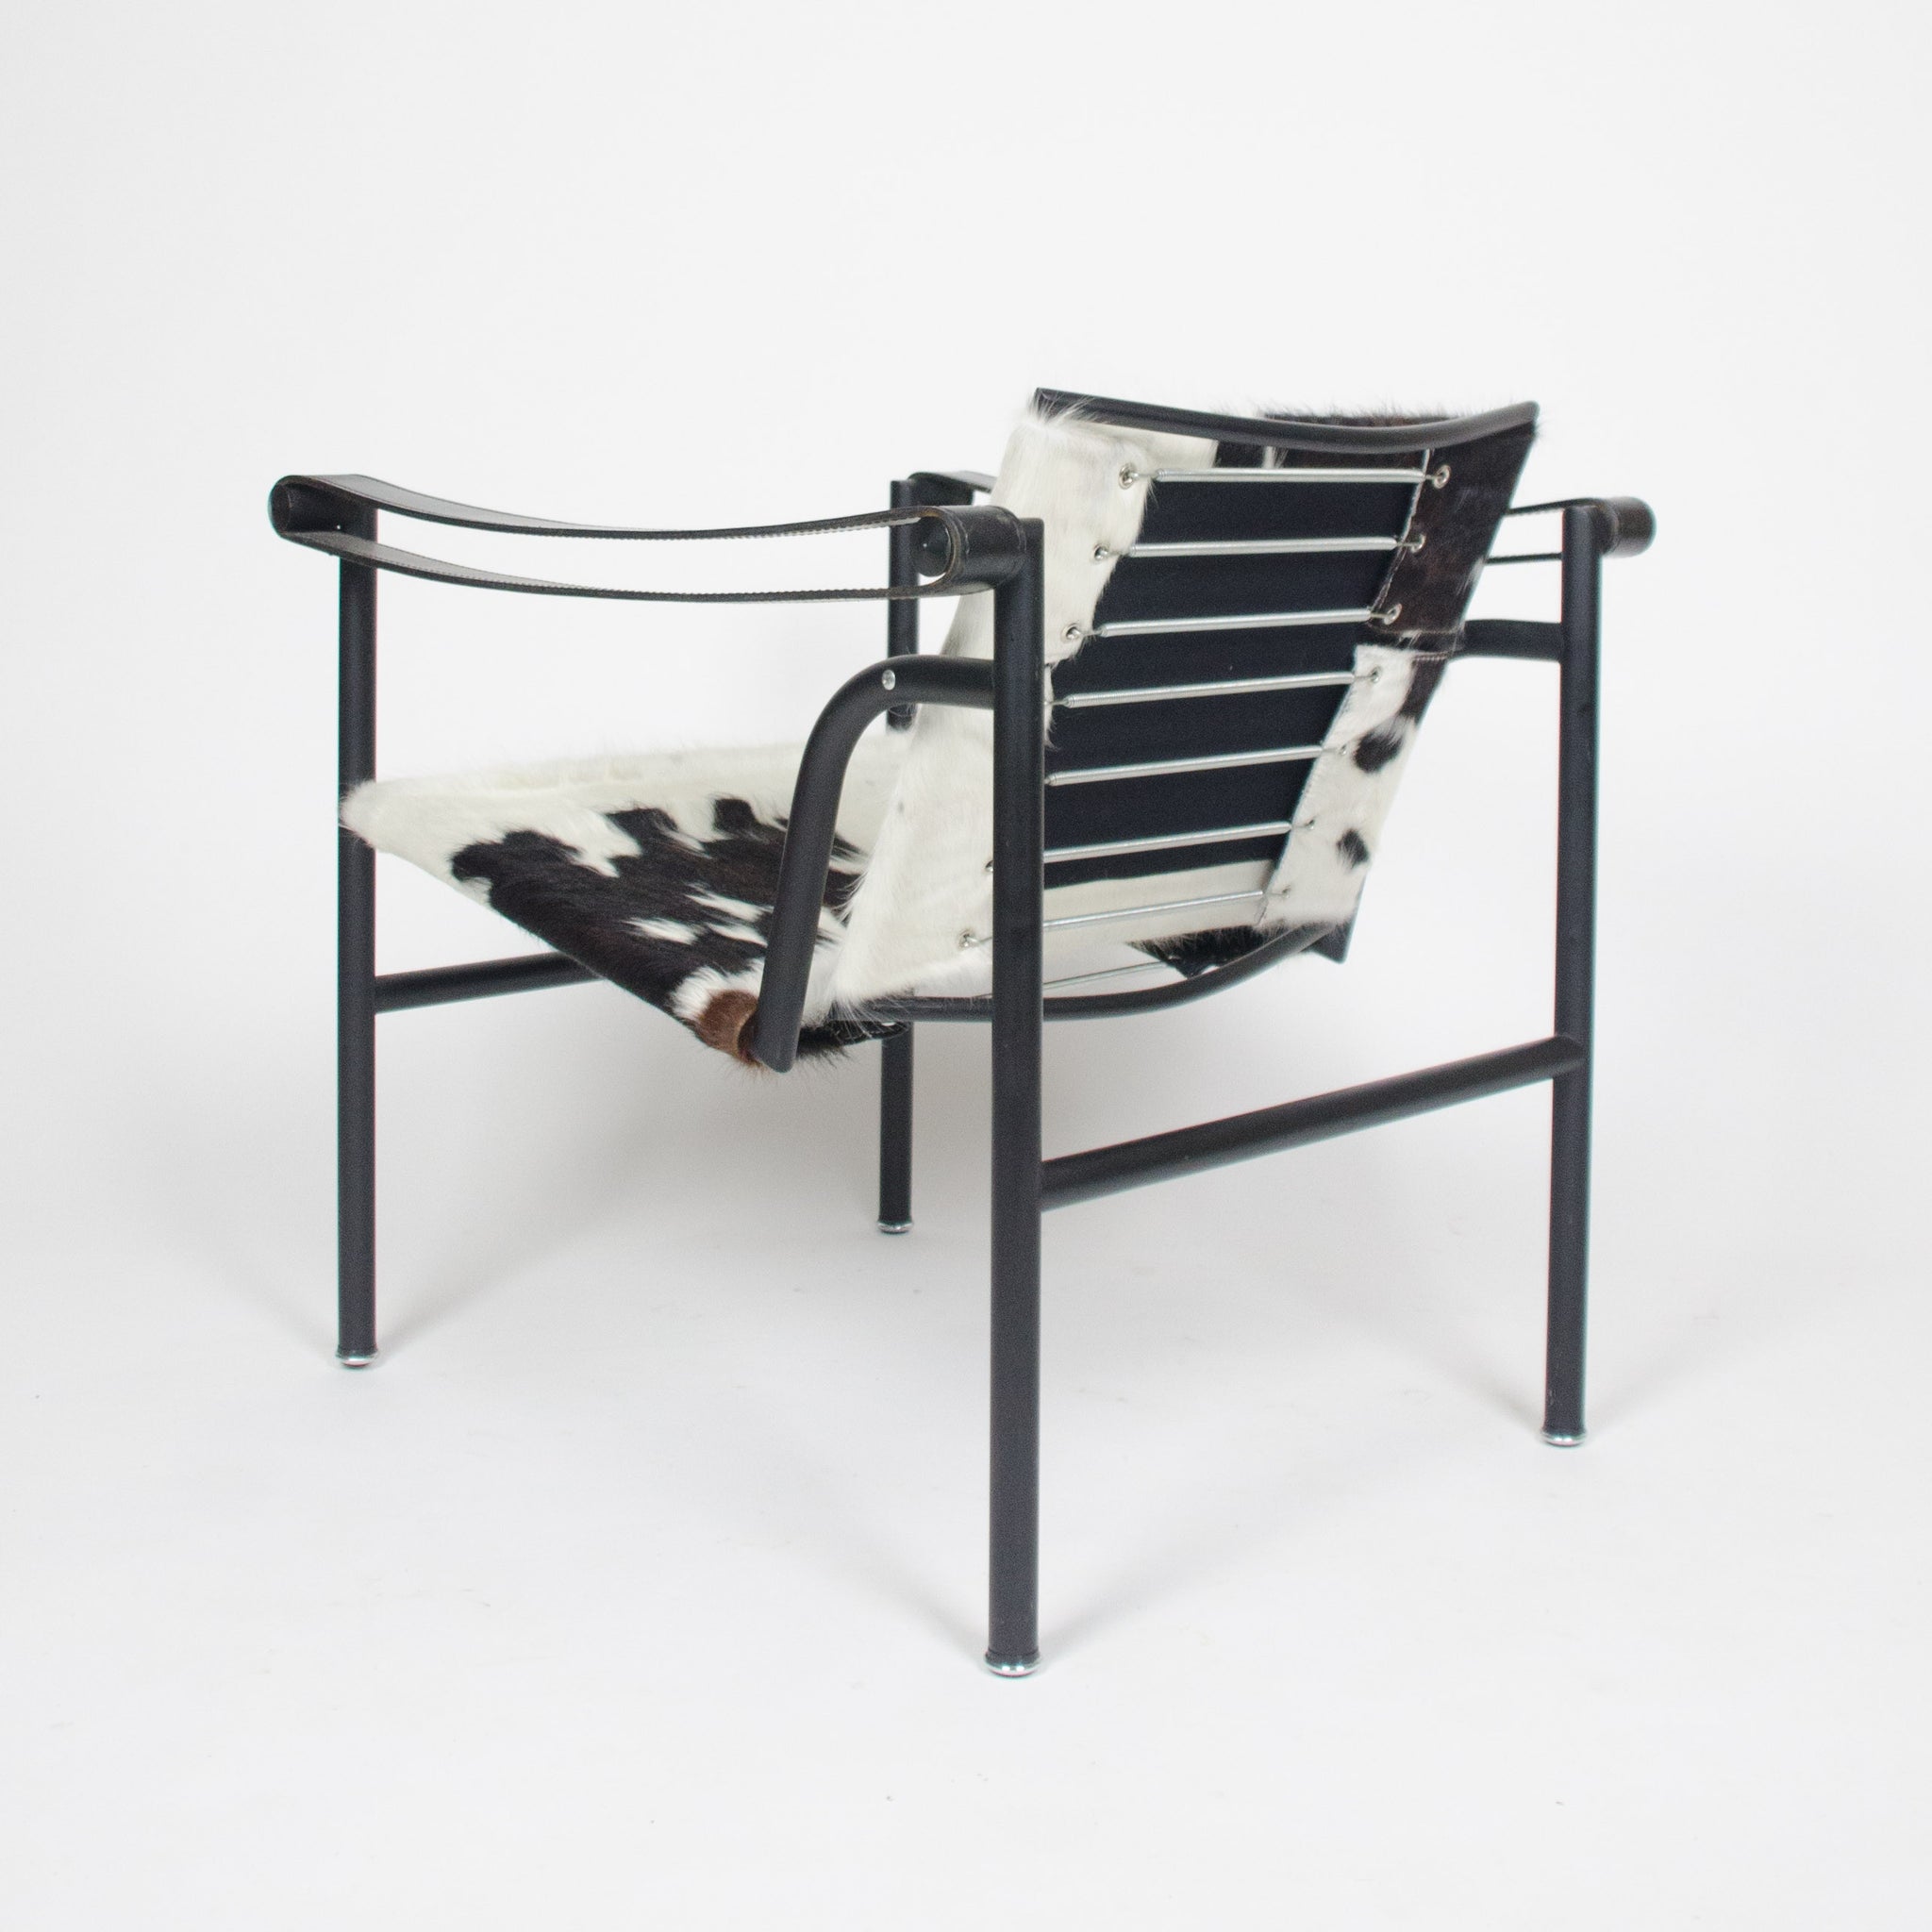 SOLD Authentic Le Corbusier Cassina LC1 Basculant Lounge Chair Cowhide Marked